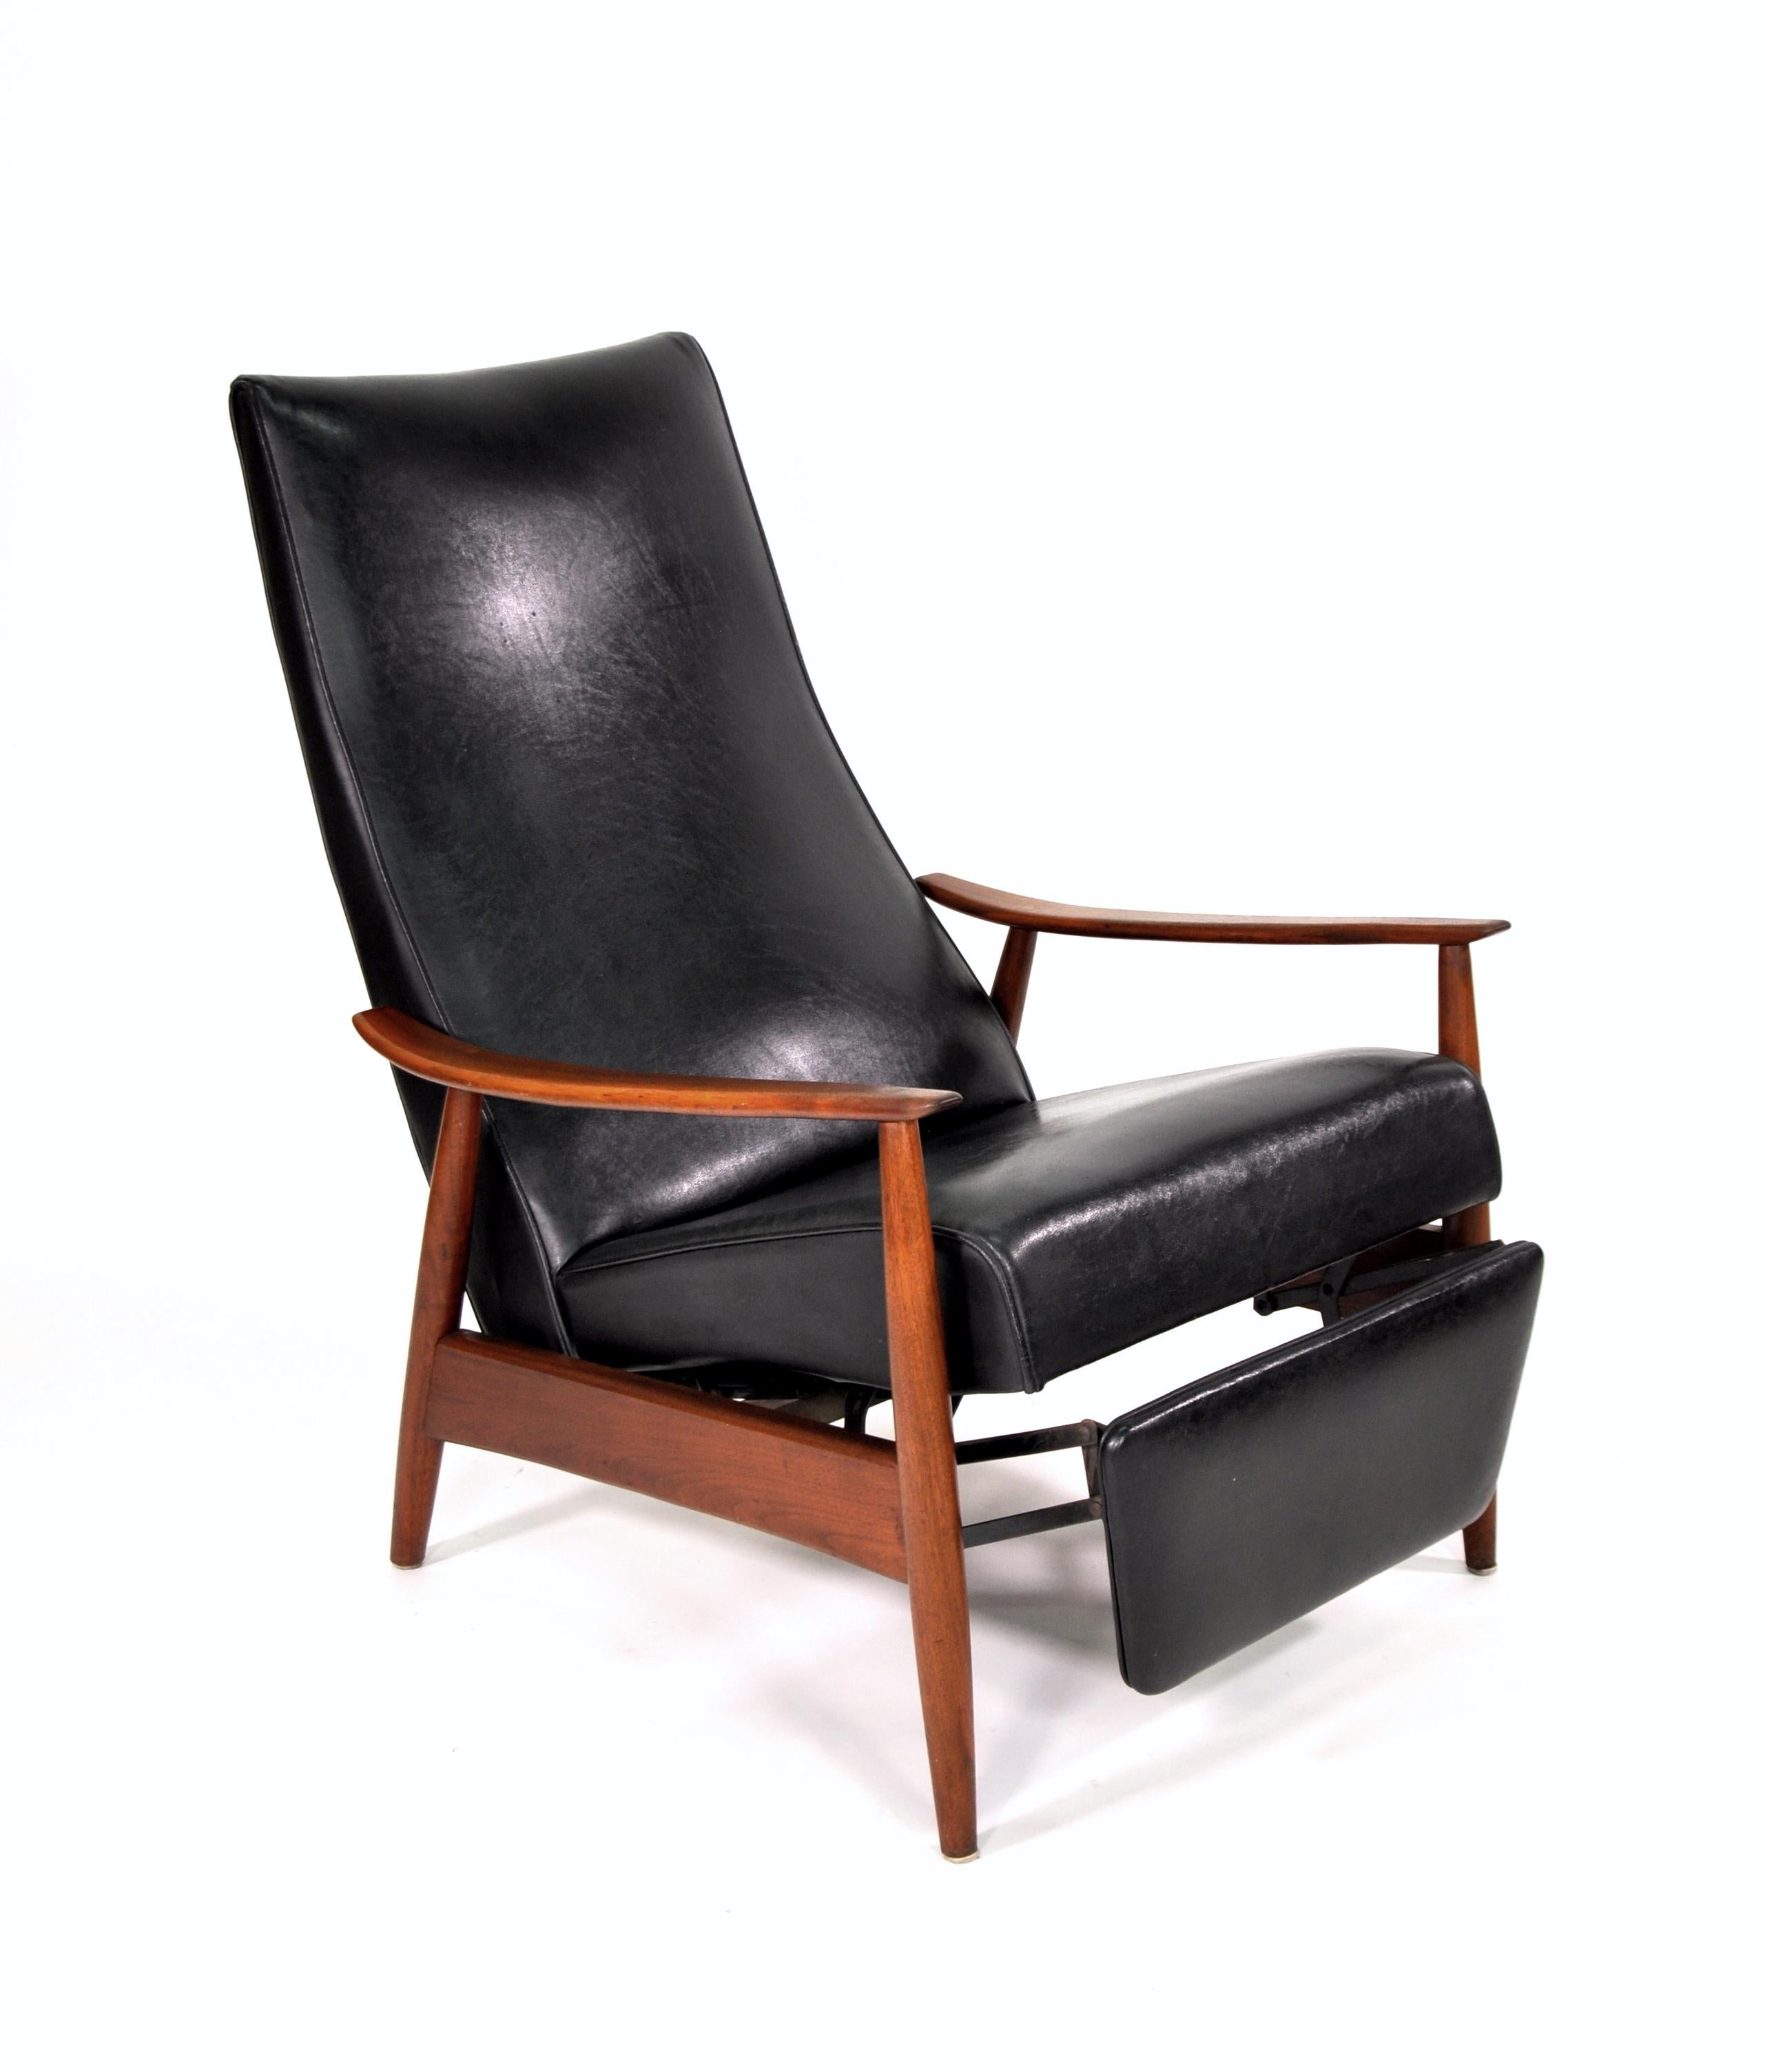 A vintage example of Milo Baughman's Mid-Century Modern 74 reclining armchair. It features an amazing, sculptural solid walnut frame and the original black vinyl upholstery. The chair has a high back and is very comfortable, as all its proportions